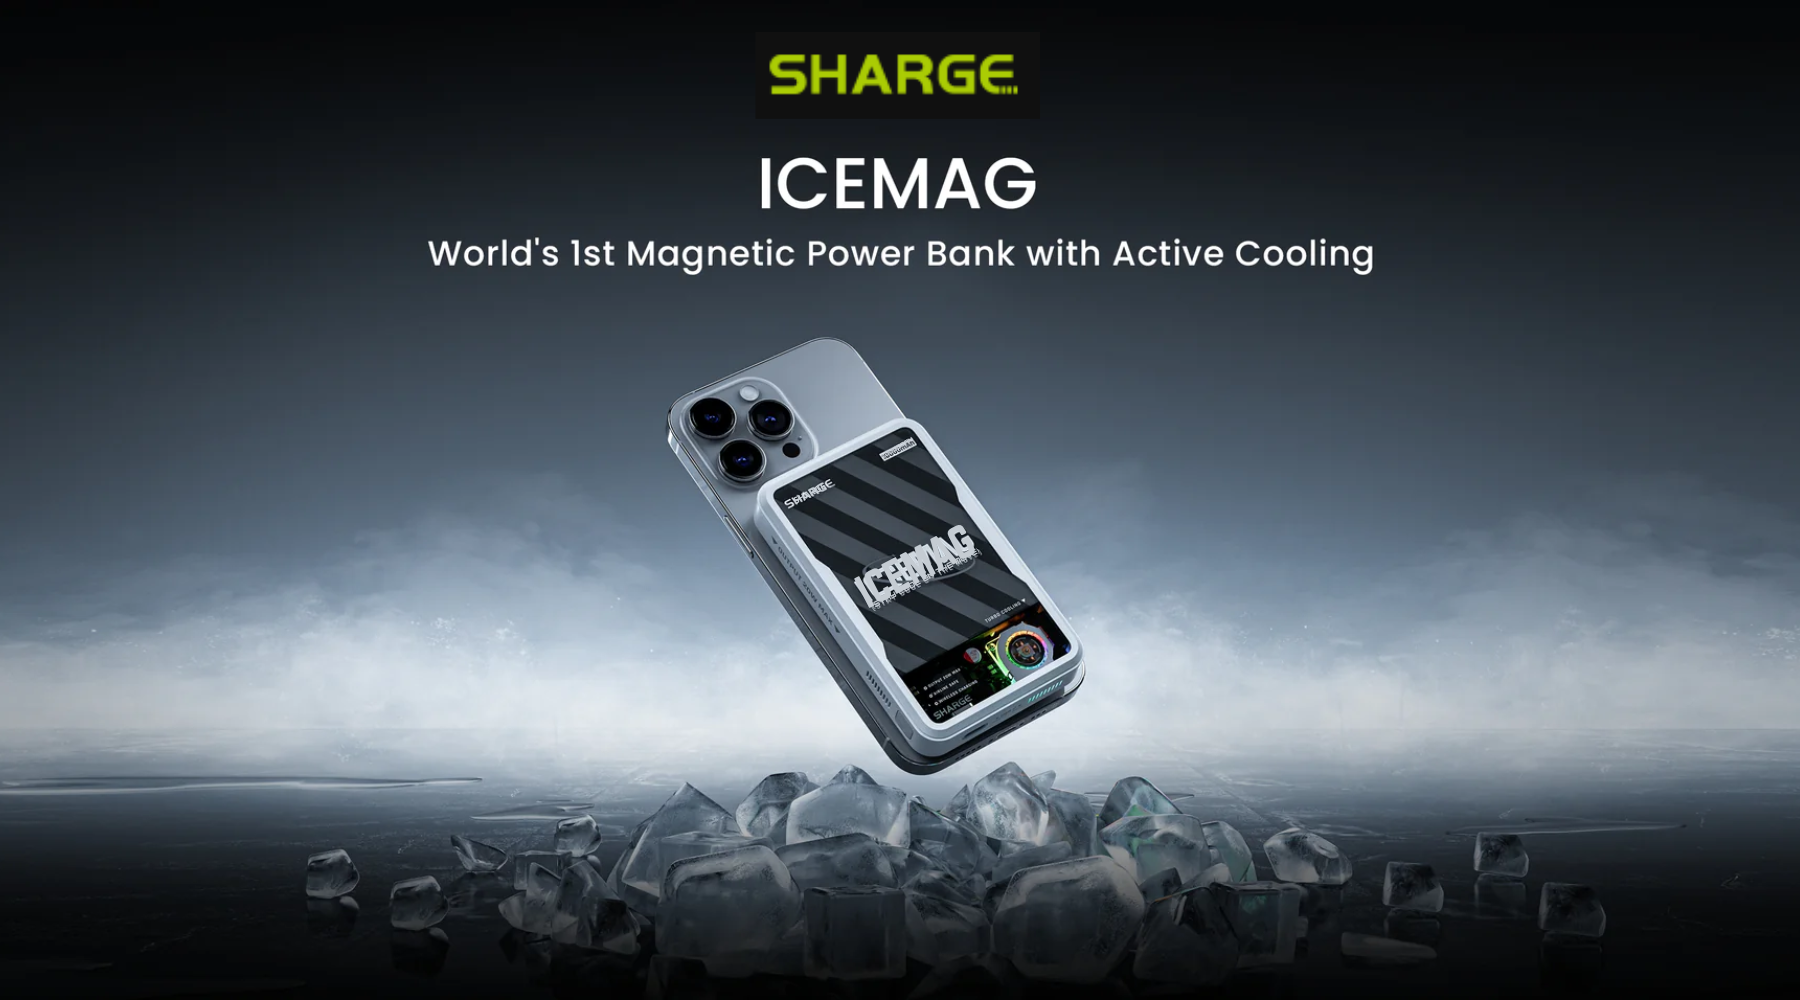 SHARGE ICEMAG – The Power Bank That Keeps Its Cool